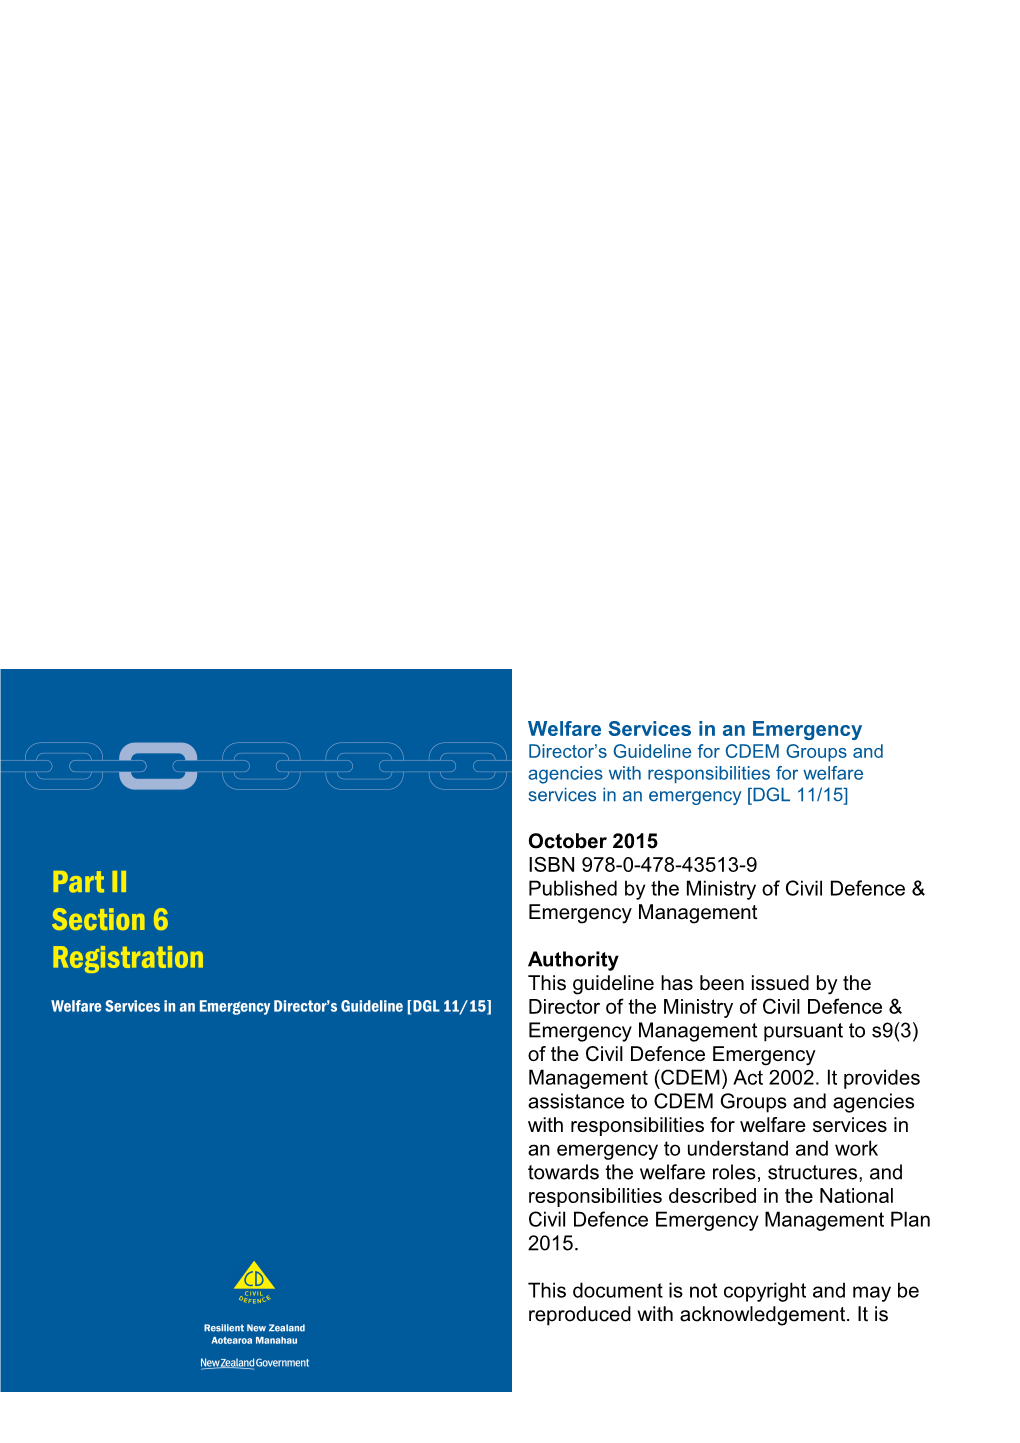 Welfare Services in an Emergency - Part II Section 6 Registration - November 2015 - Ministry